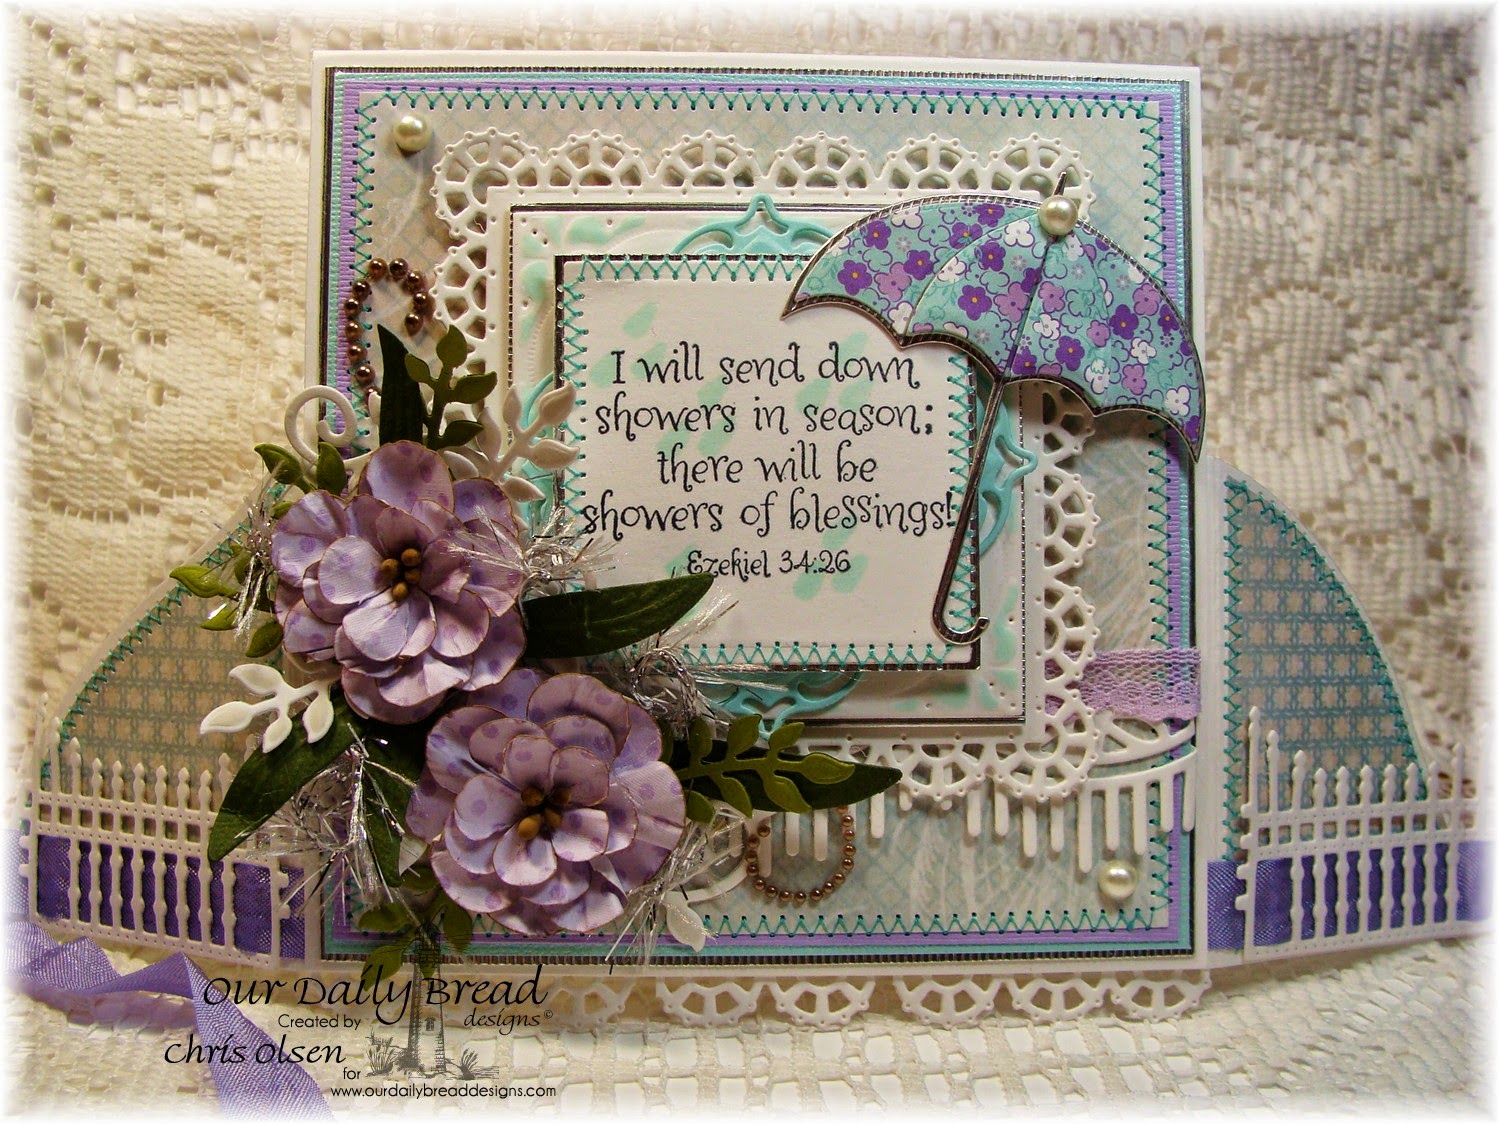 Our Daily Bread Designs, Umbrella die, Showers of blessing, Layered Lacey Squares die, Fancy Foliage, Beautiful Borders, Aster die, Shabby Rose Collection, gilded gate die, designer-Chris Olsen, Twinkles Glow with Stamps